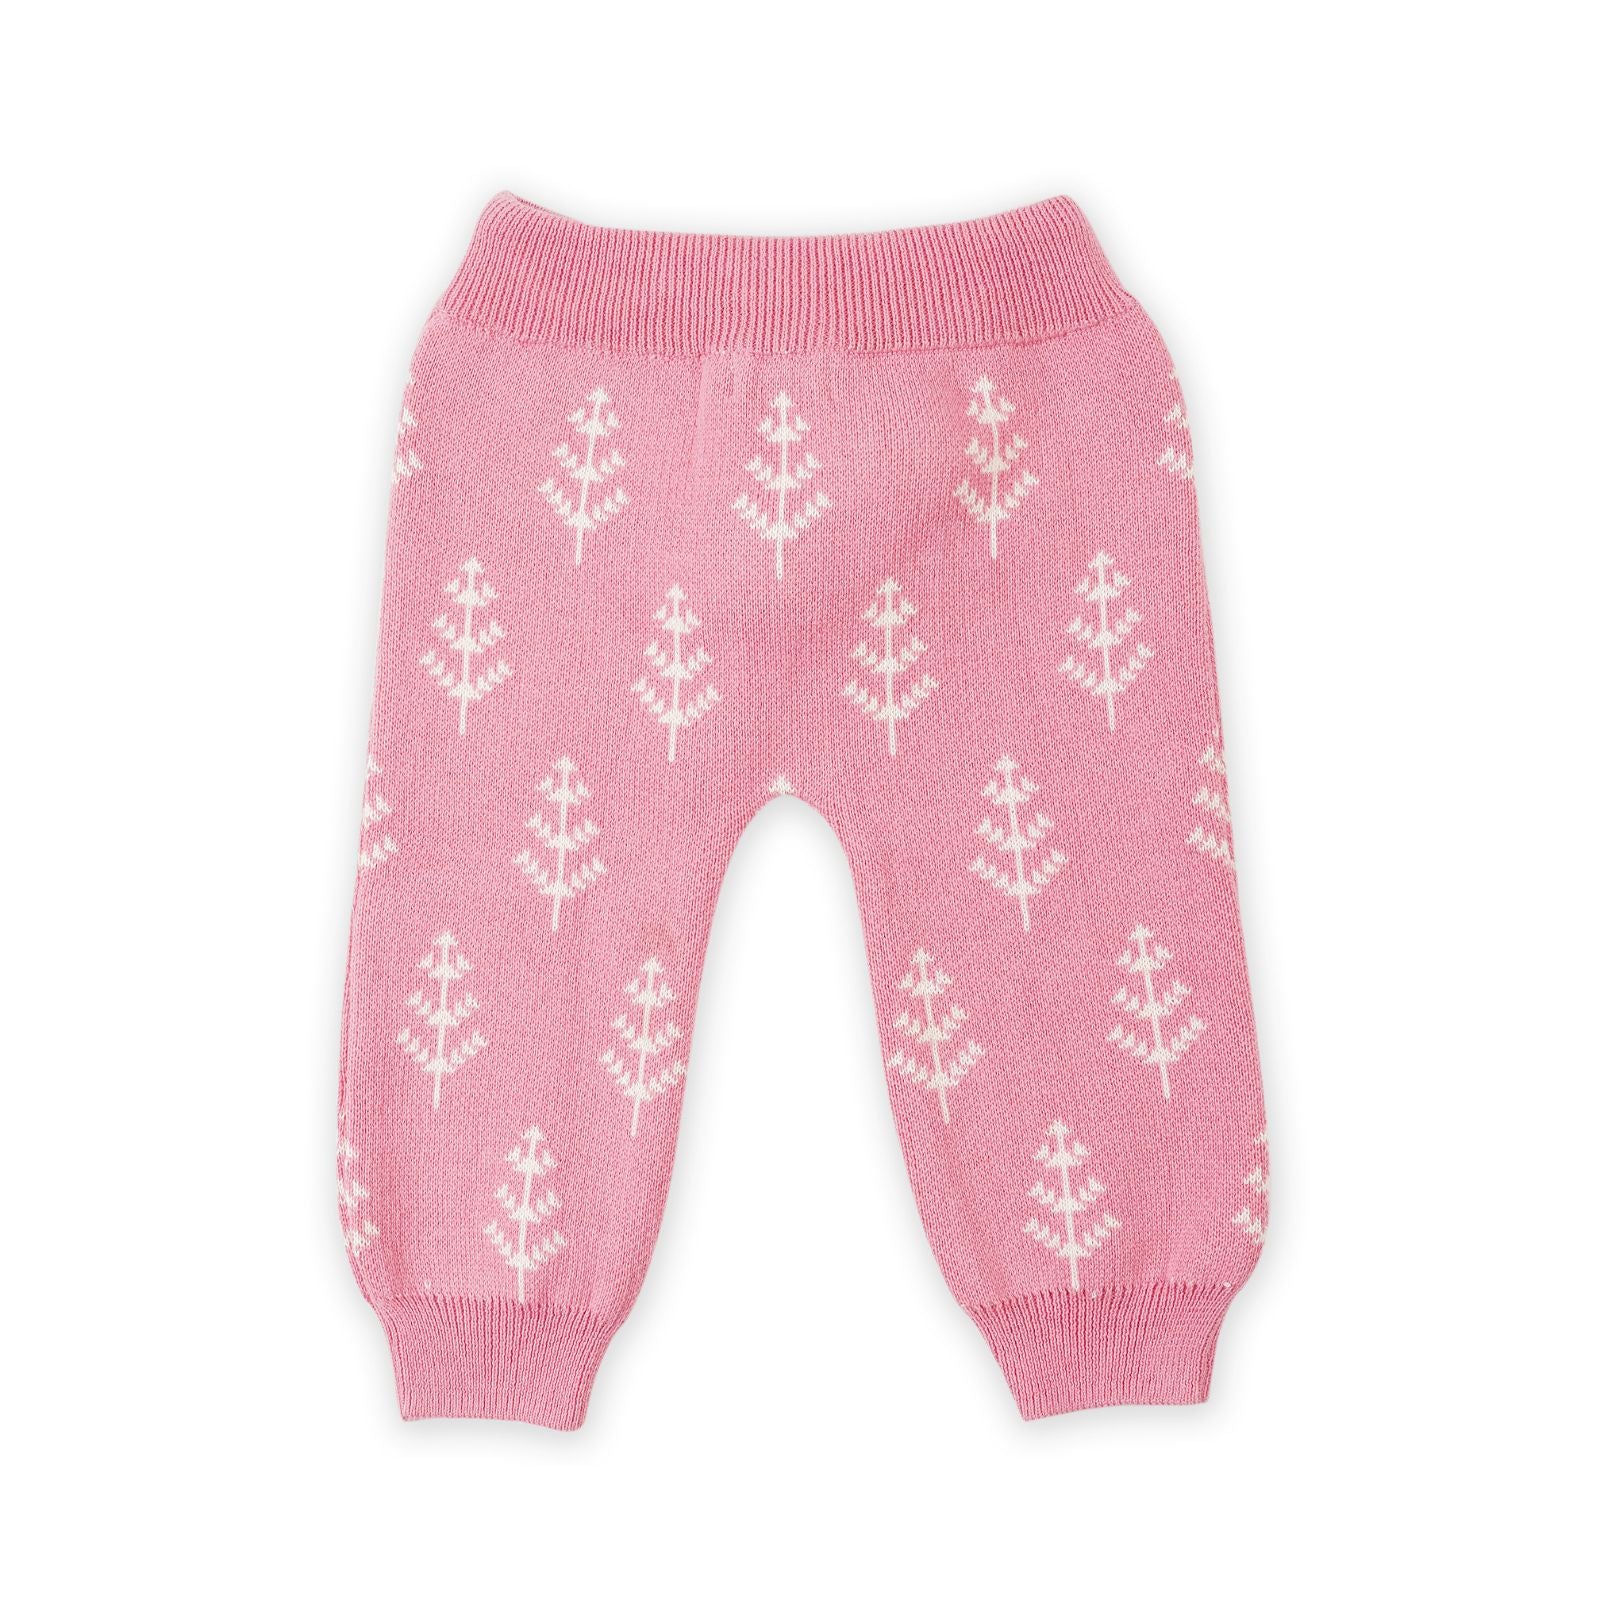 Wiskers Jacquard Sweater Set of 2 - Pink